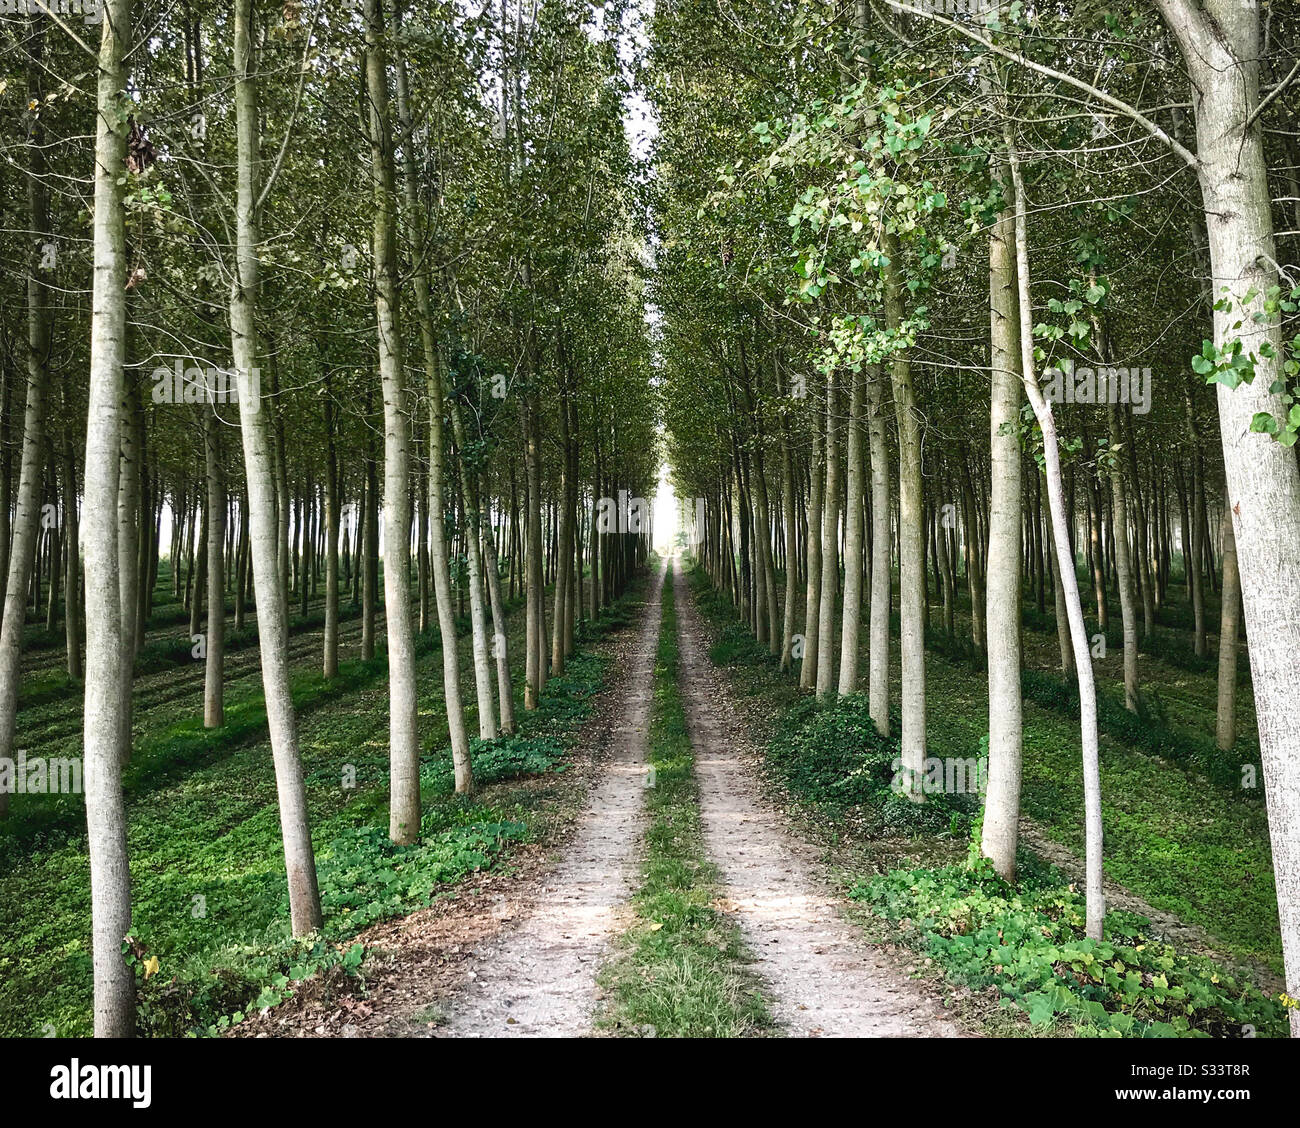 Tall skinny white trunk trees with green leaves lined up with a dirt road down the middle. Stock Photo